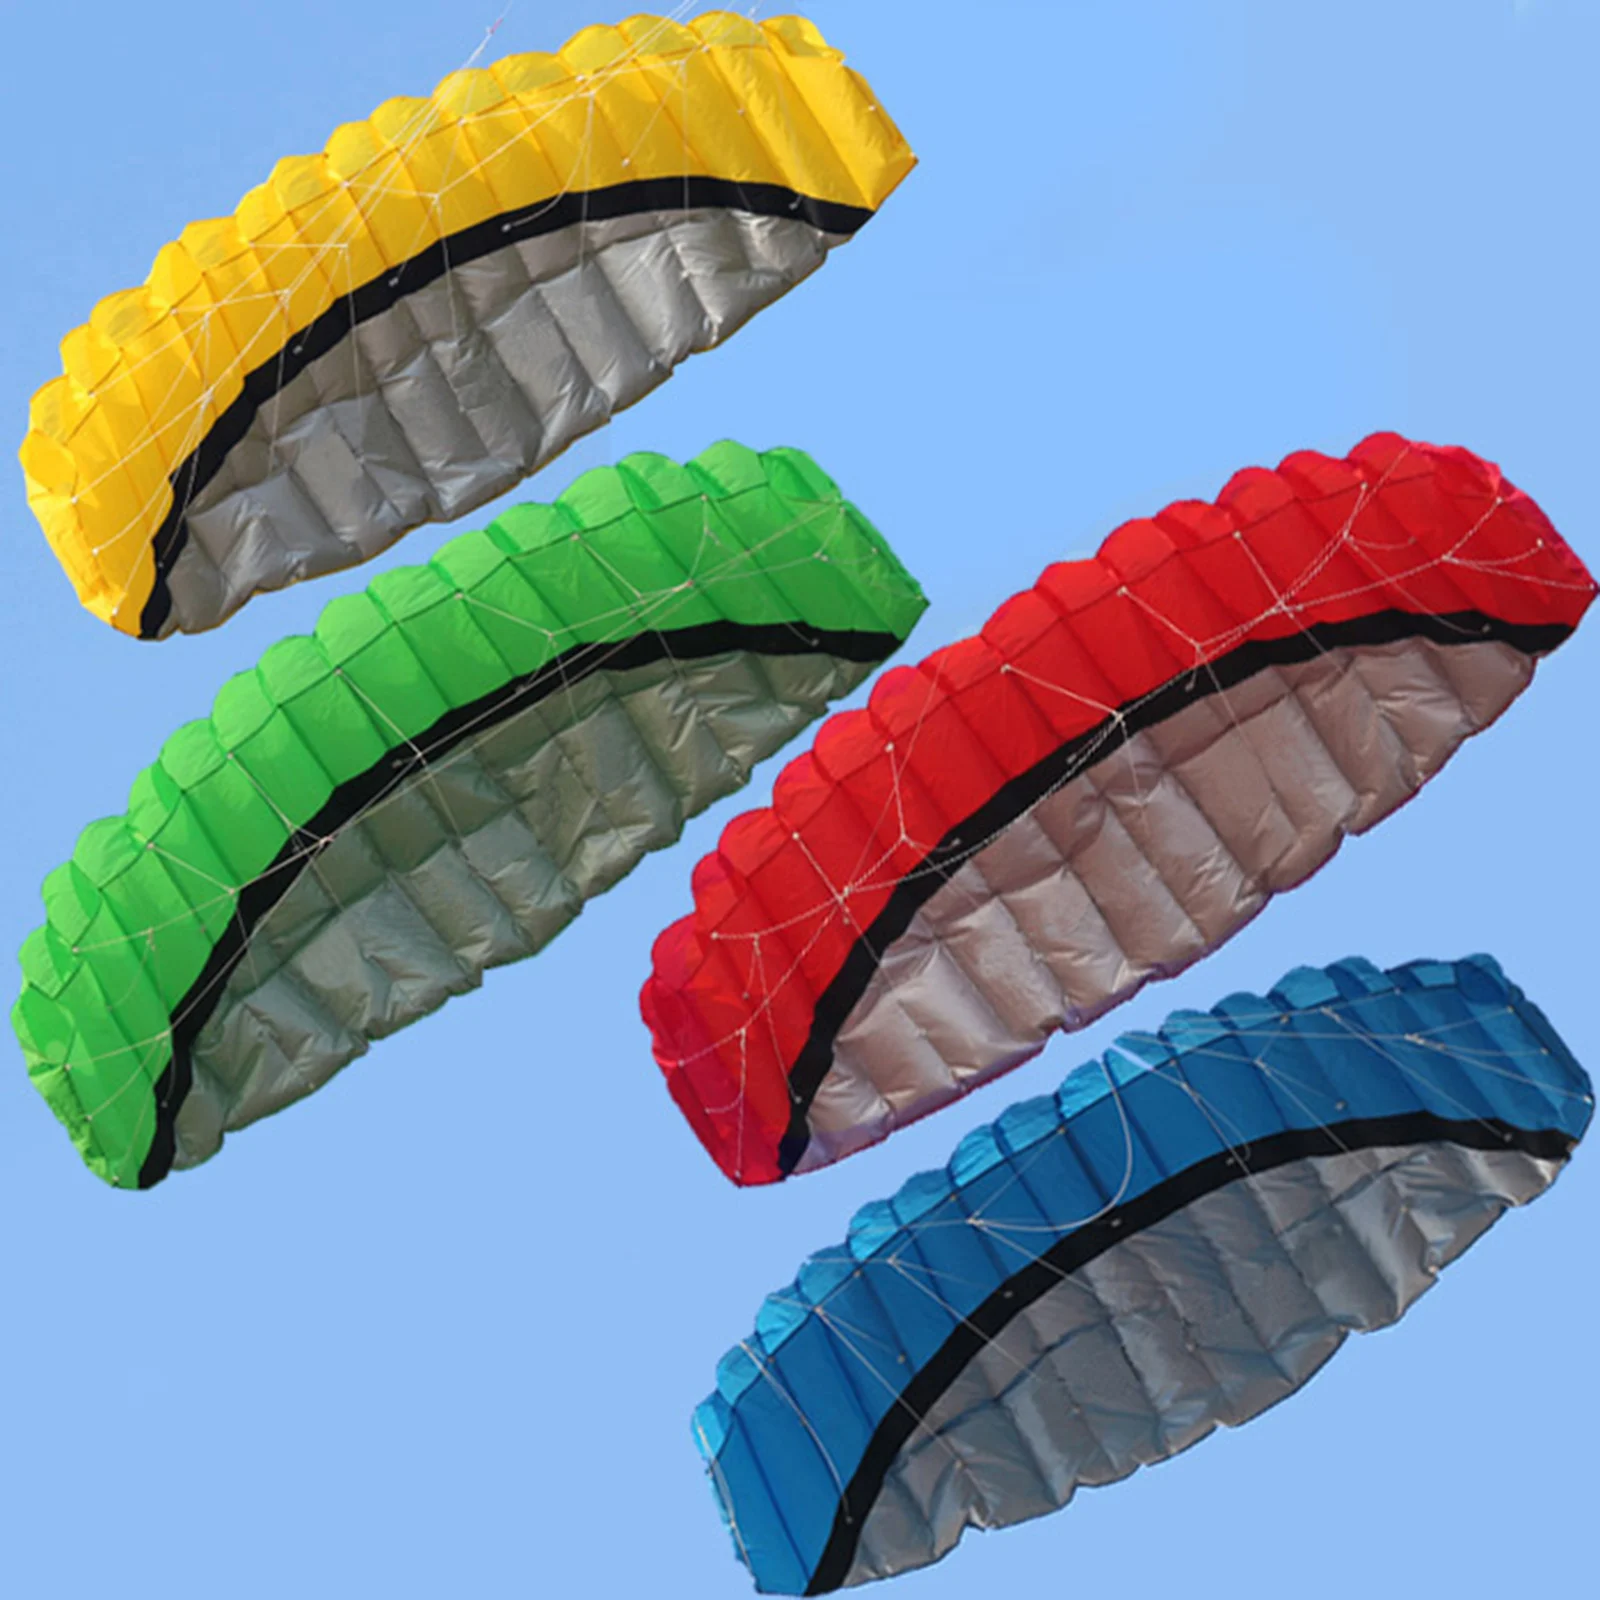 Inflatable Beach Summer Surfing Stunt Kite 2.5m Dual Line Sport Foil Parachute Kites for Unisex Adults Kids Outdoor Water Sports